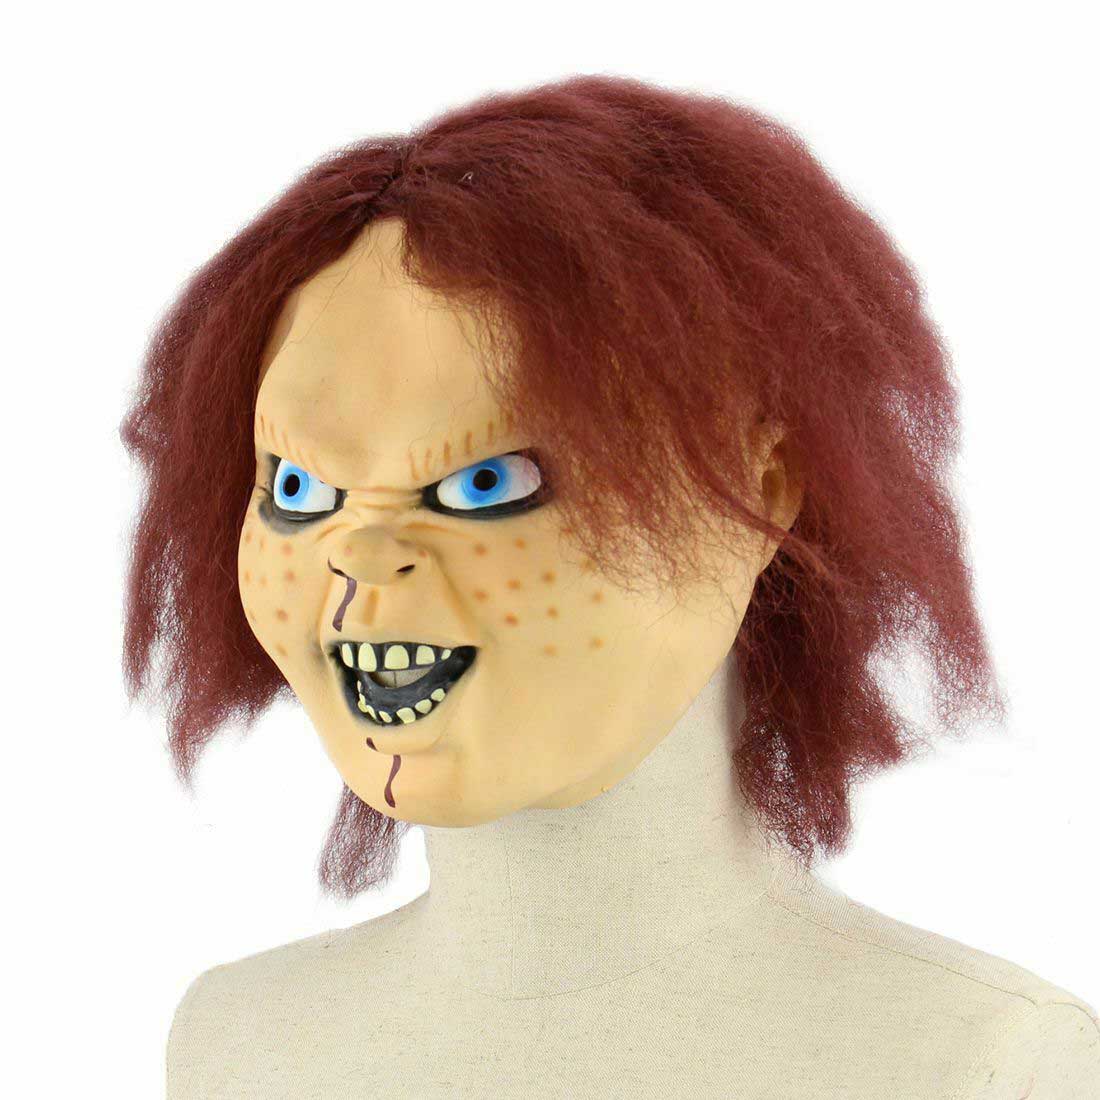 Scary Horror Child's Play Chucky Costume Latex Mask Halloween Cosplay Masquerade Party Props Brown